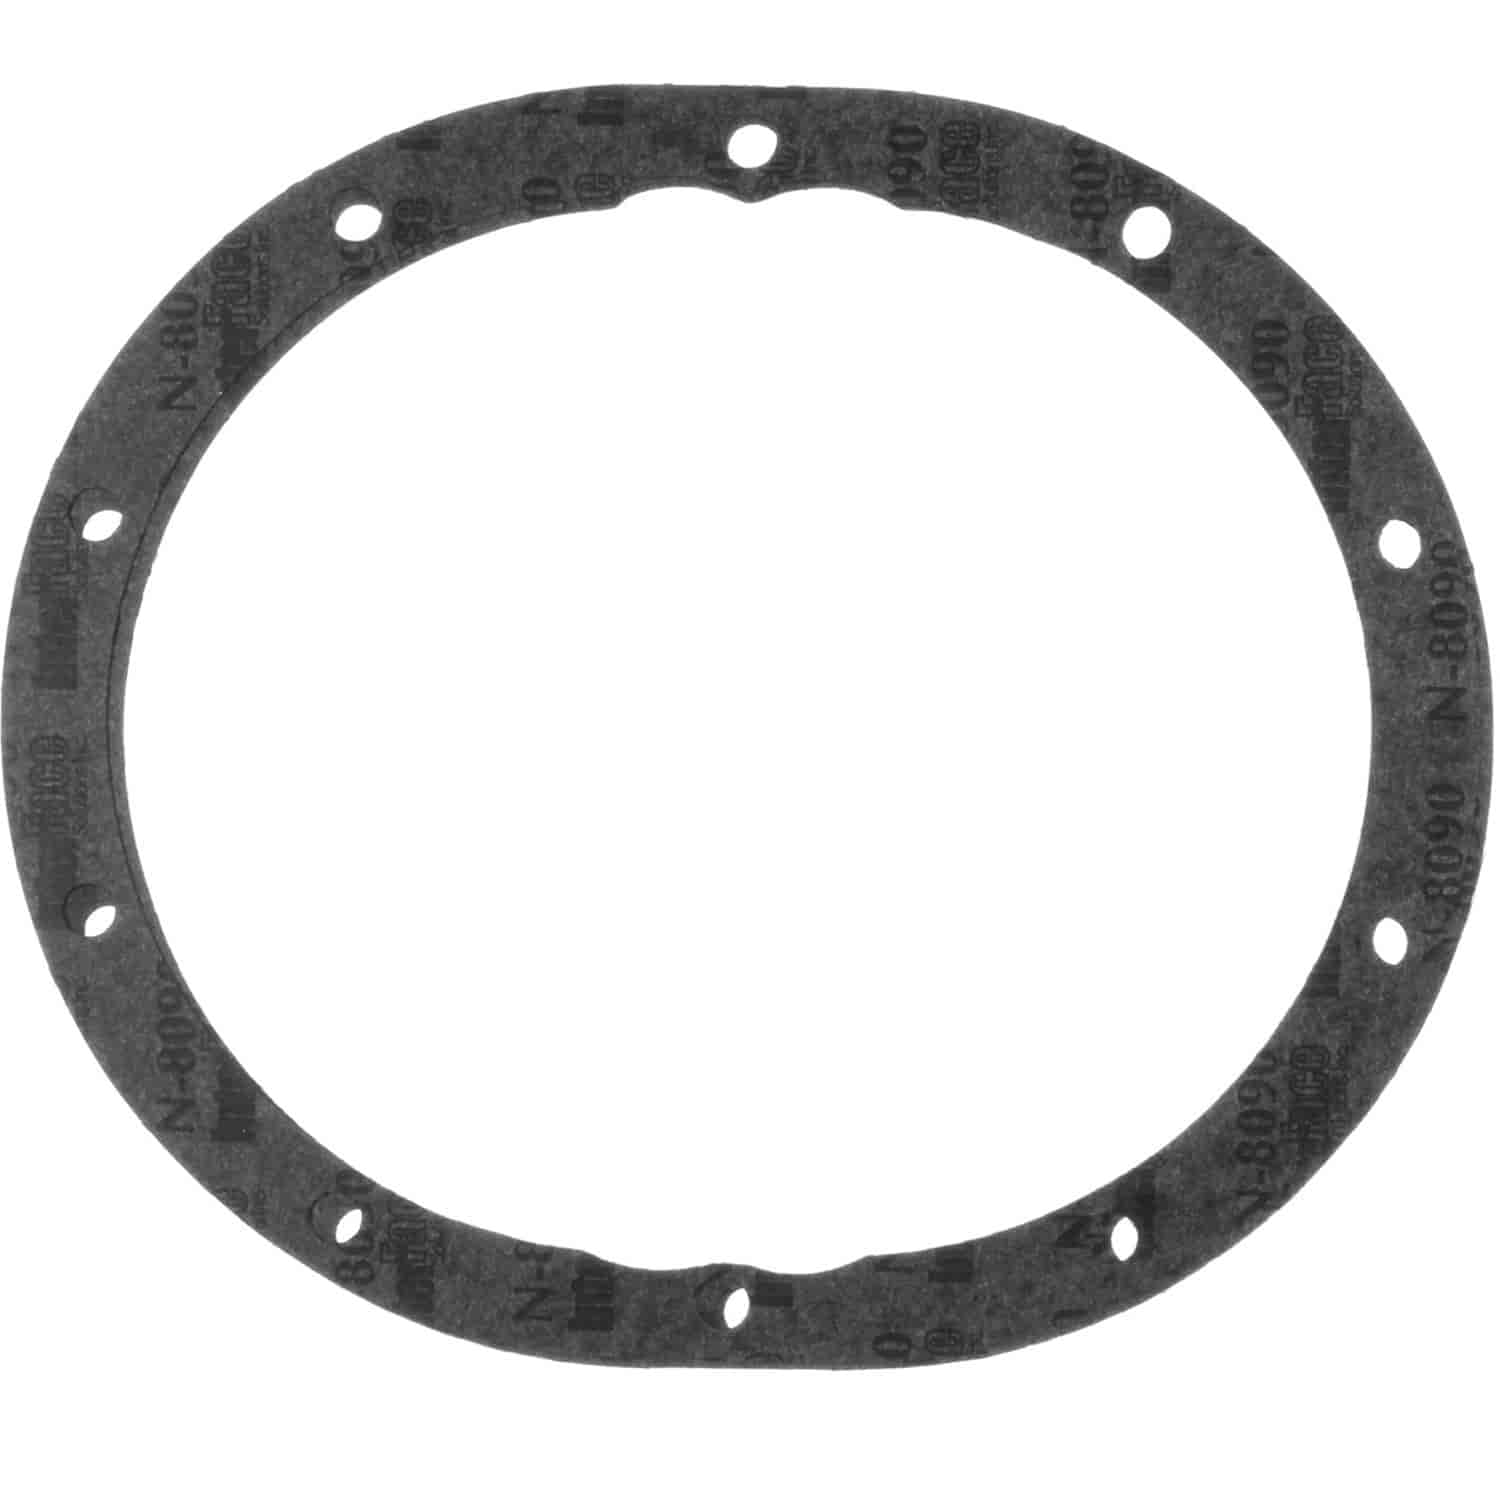 Differential Carrier Gasket Chev 55-63